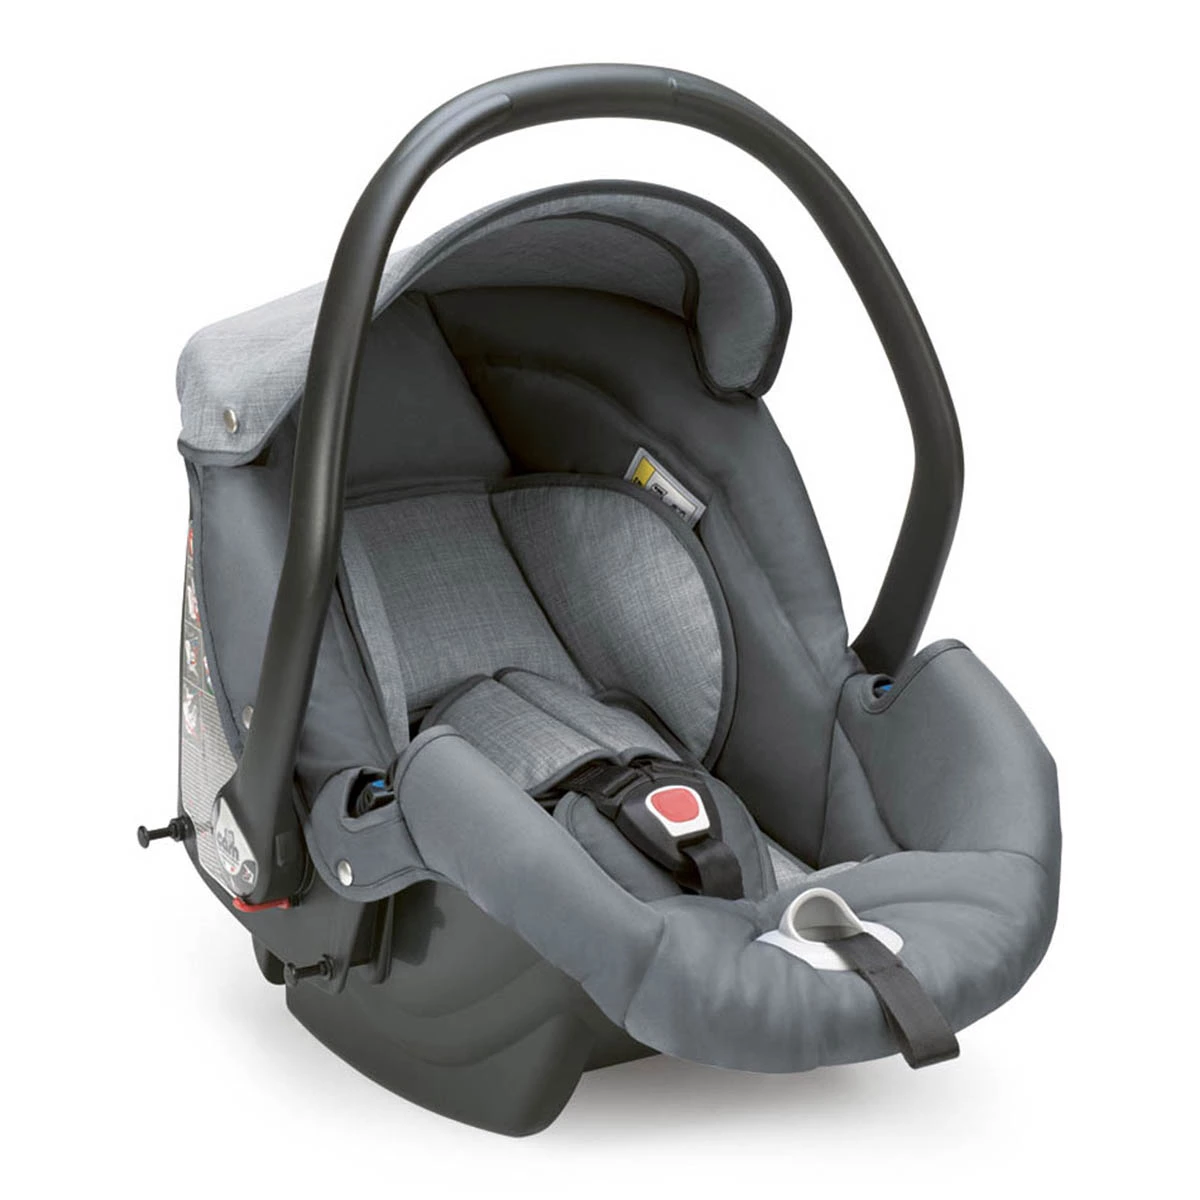 Baby & Toddler Car Seats - best prices in Albania and fast delivery